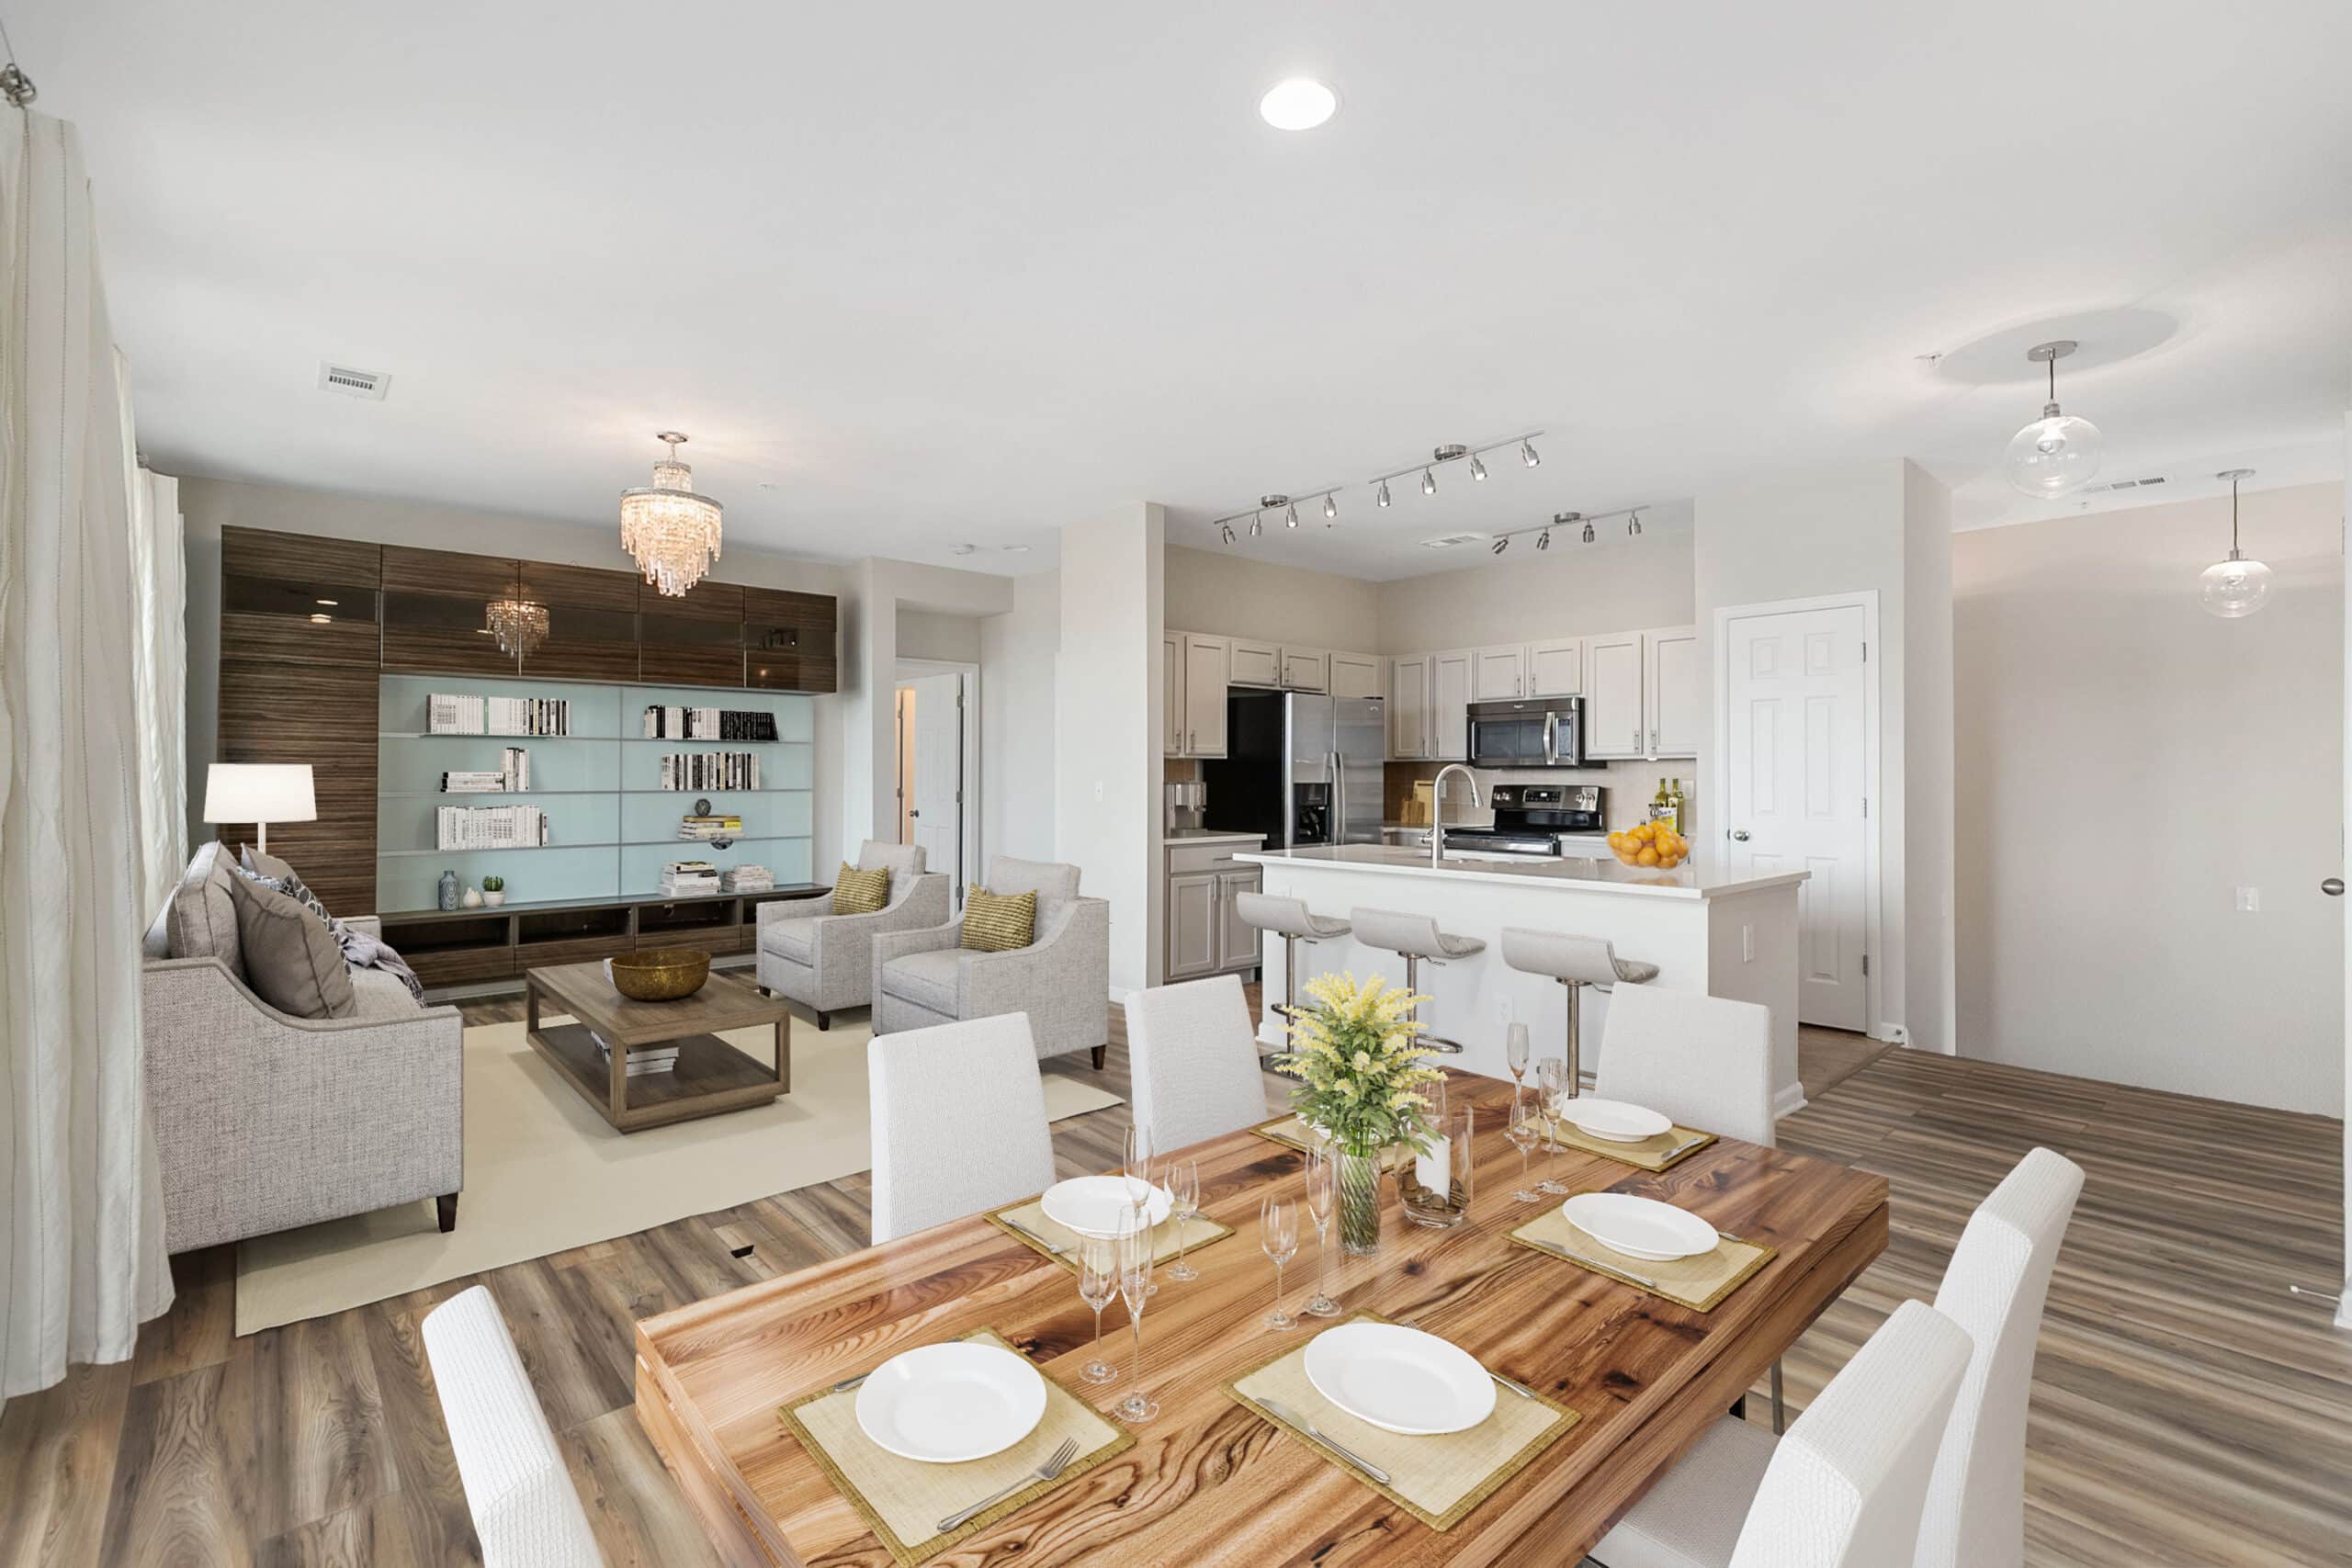 Elevating the Standard: Virtual Tours and Staging